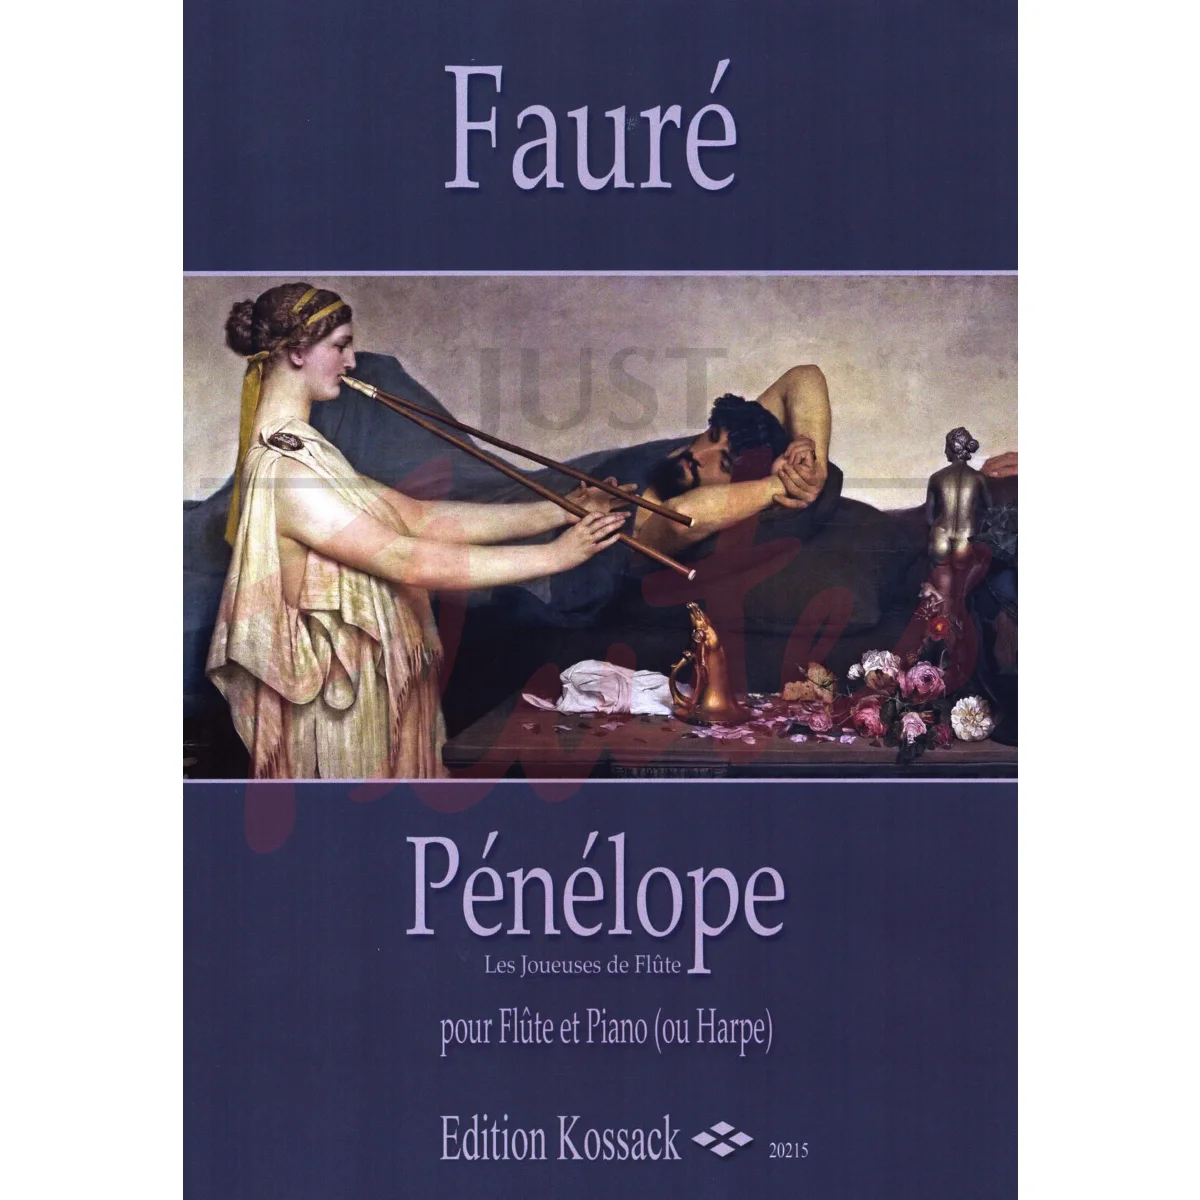 Pénélope for Flute and Piano (or Harp)